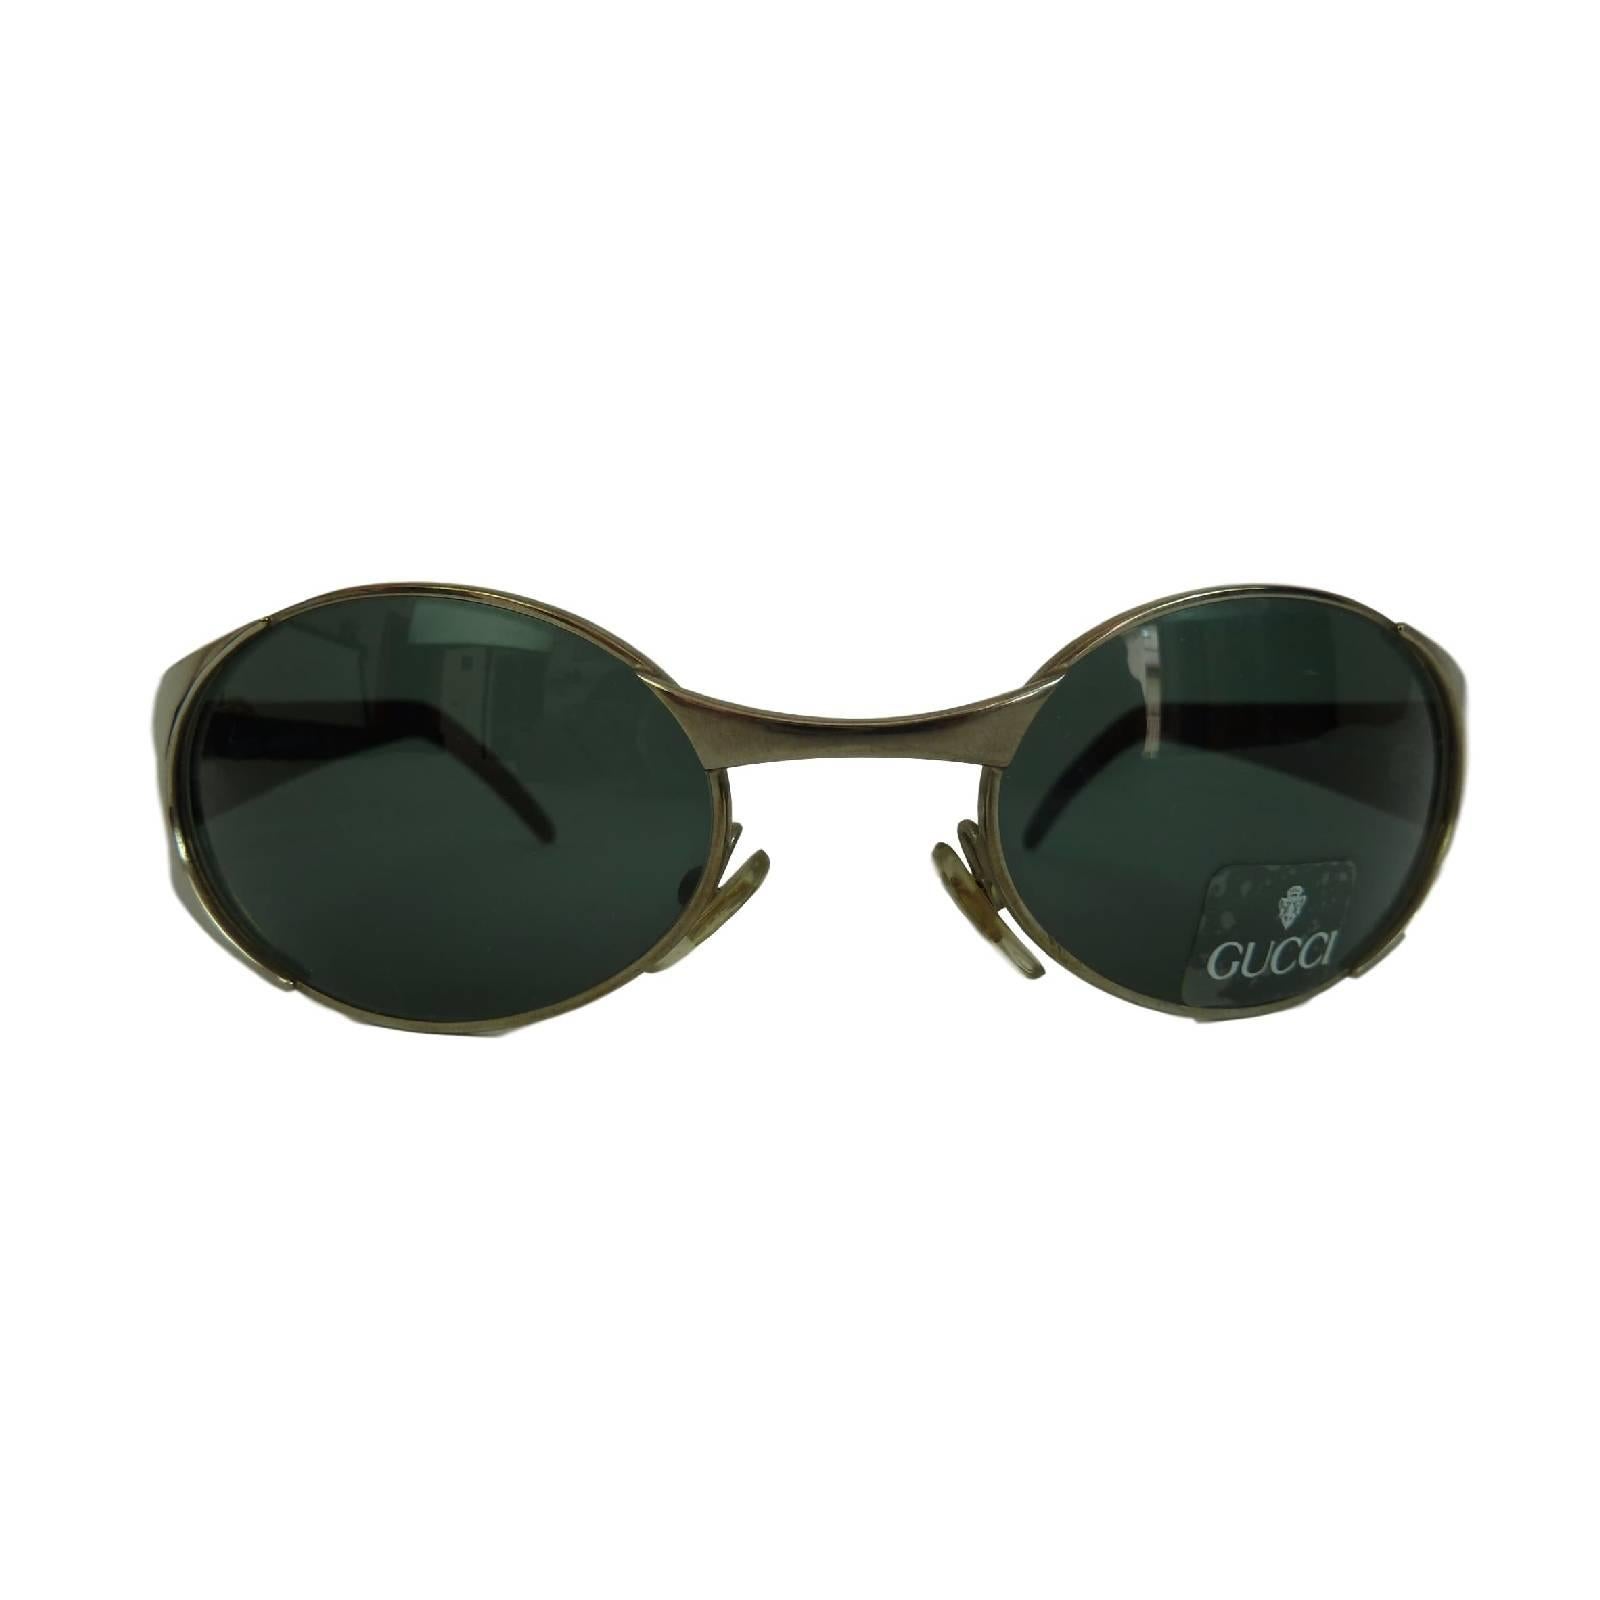 Gucci vintage sunglasses GG2378/S shell tortoise and green shape whit metal frame silver color at mirror. Shell in bone material made in italy. Rare model 1980s

Eye size: 56 mm
Bridge: 21 mm
Temple Lenght: 120 mm

Material: Bone and metal
Color: